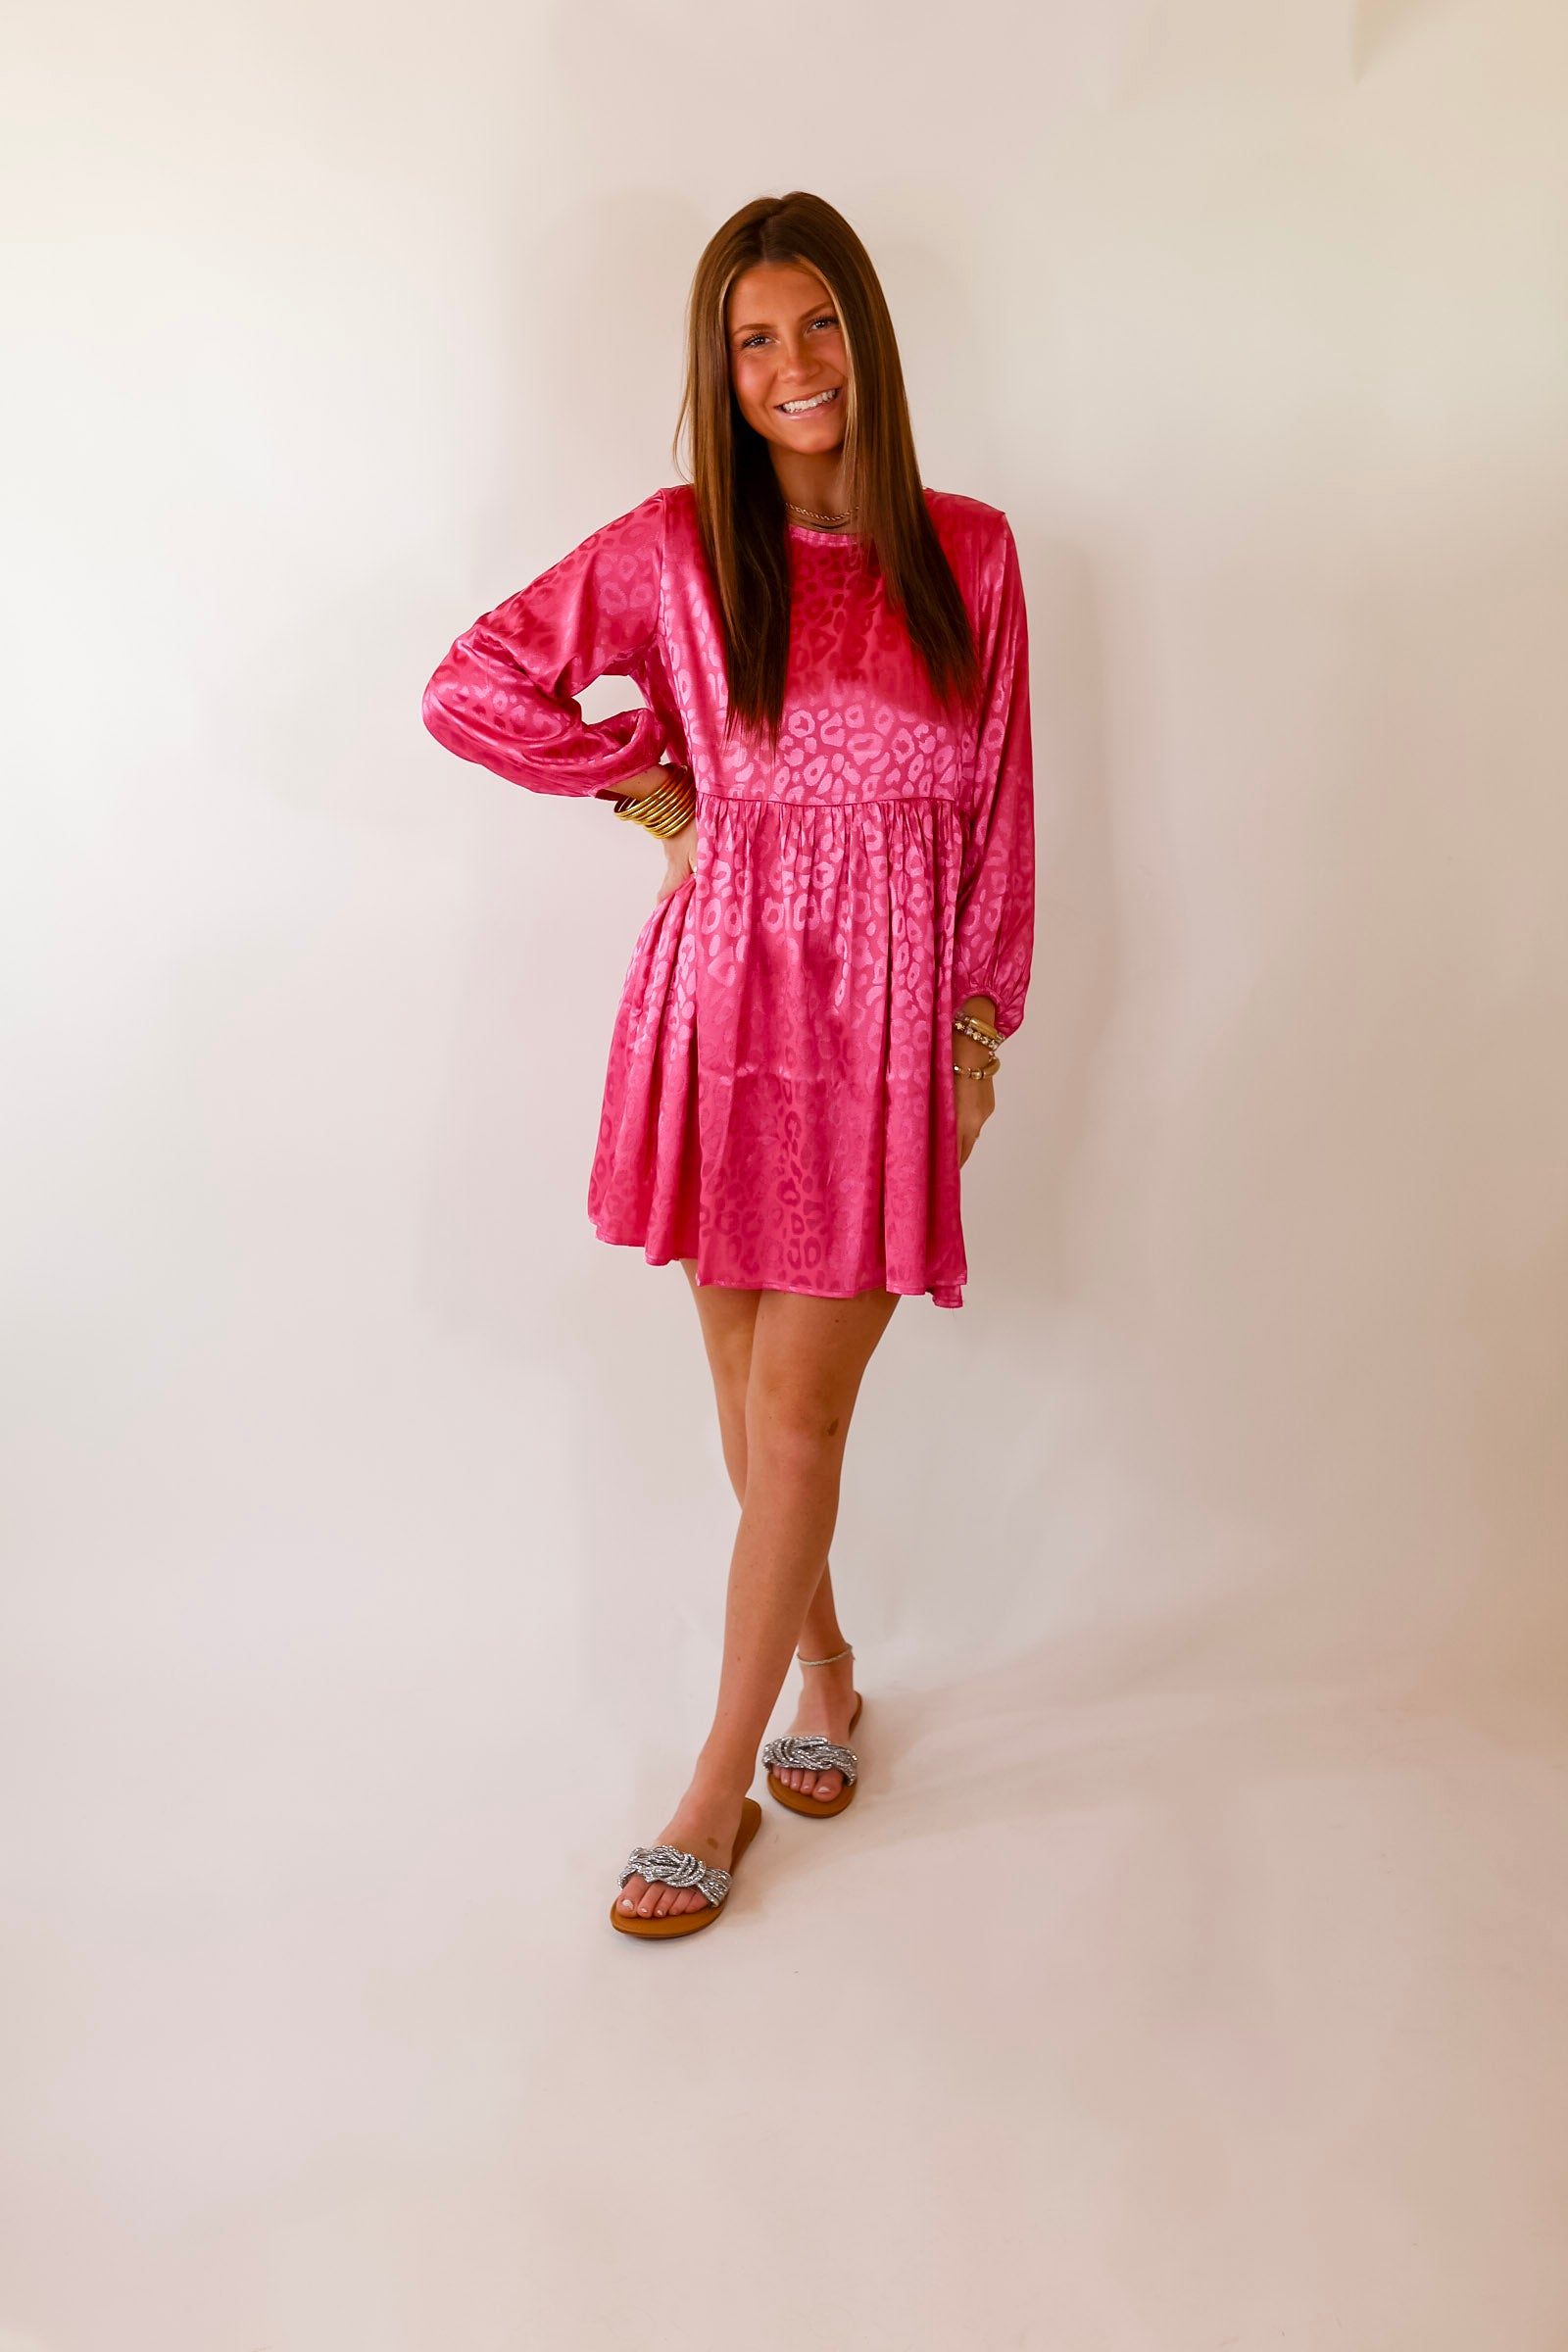 Change Is Coming Leopard Print Babydoll Dress with Long Sleeves in Hot Pink - Giddy Up Glamour Boutique